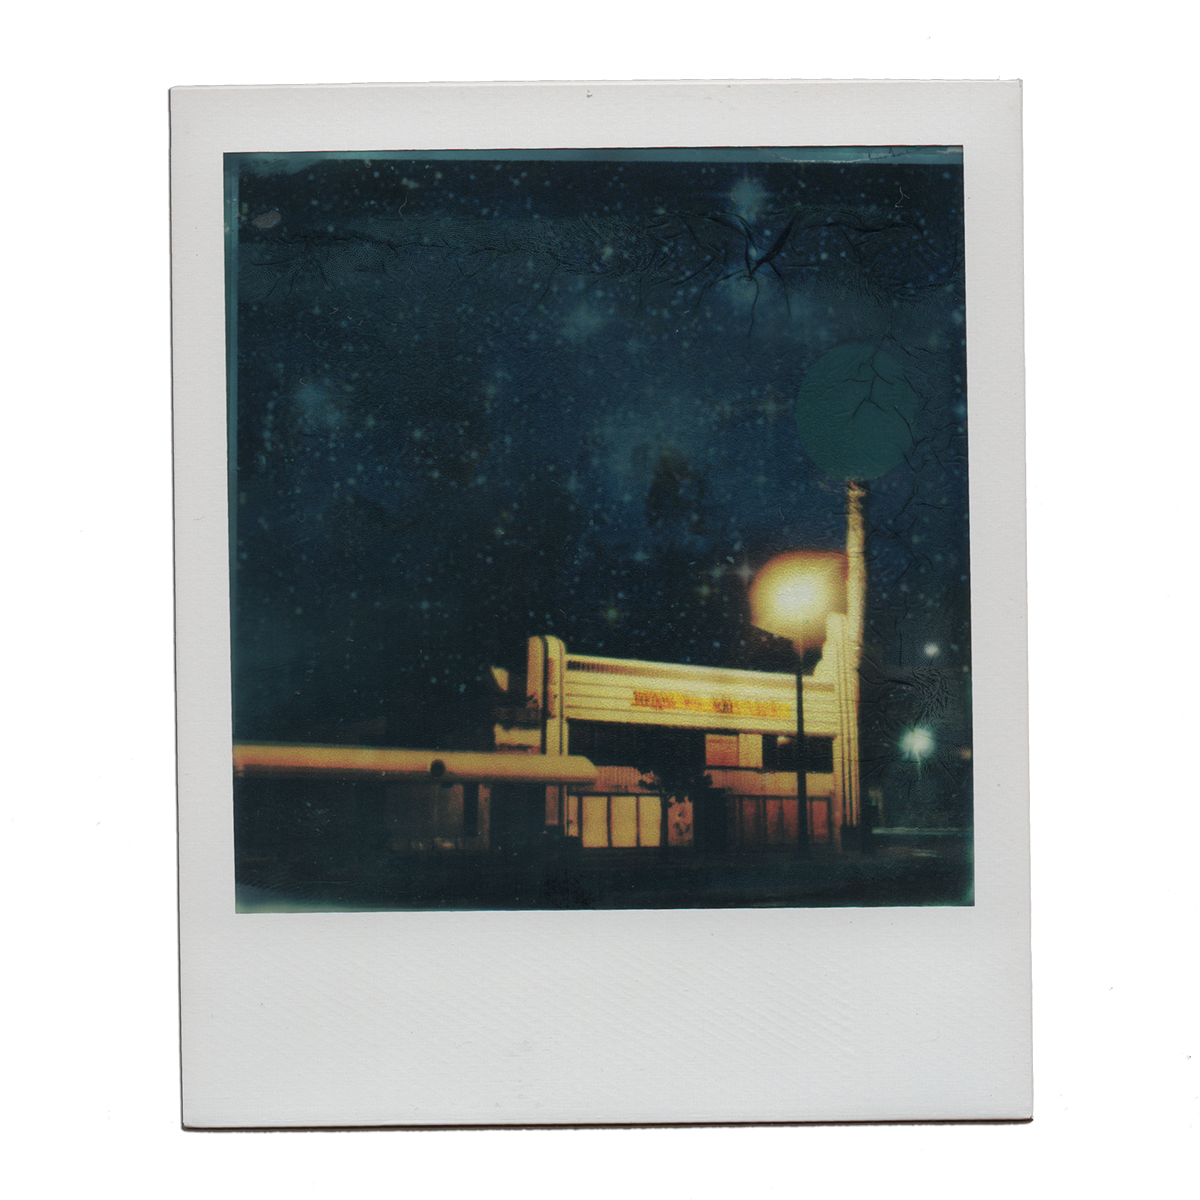 inprnthtkls in.prnthtkls CamWyckoff Cameron Wyckoff  polaroid SX-70 Impossible Project PX680 long exposure long beach Atlantic Ave night photography